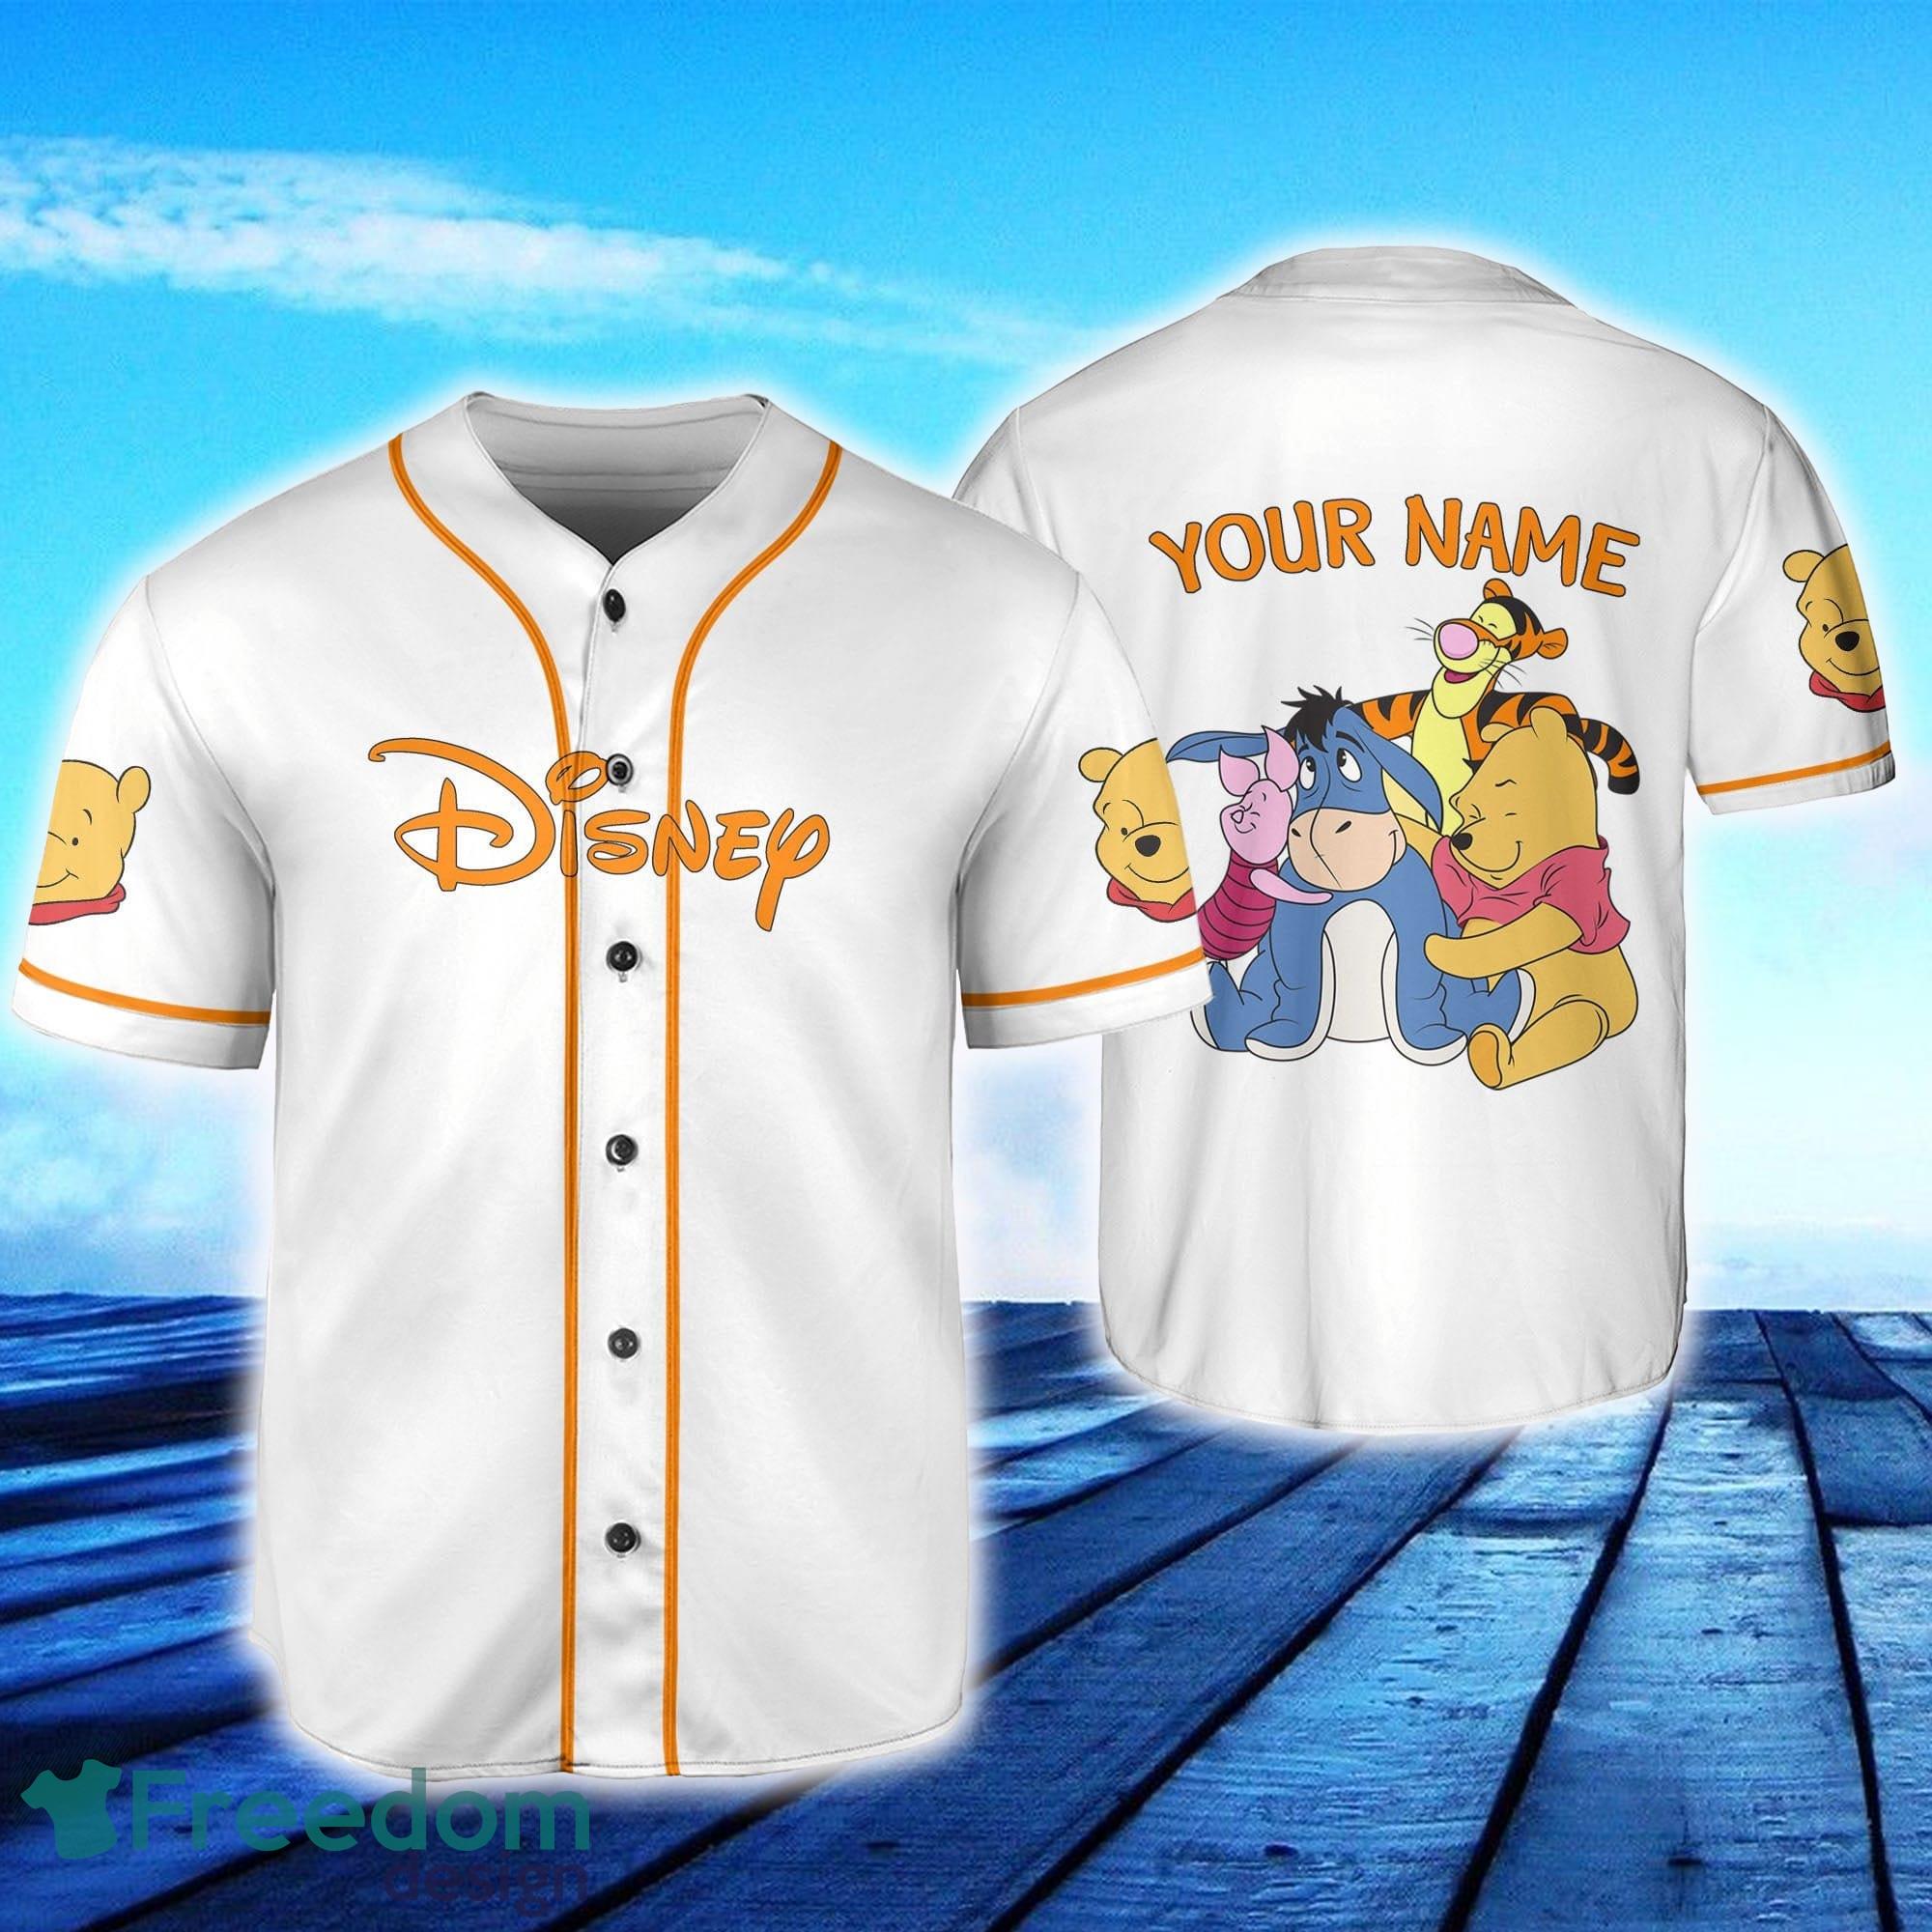  Custom Baseball Jersey Design Your Own Personalized Baseball  Jerseys Shirt, Clothes for Men Women, Custom 2023 World Baseball Jersey  Sports Baseball Shirts, Personalized Name Number for Men Women : Clothing,  Shoes